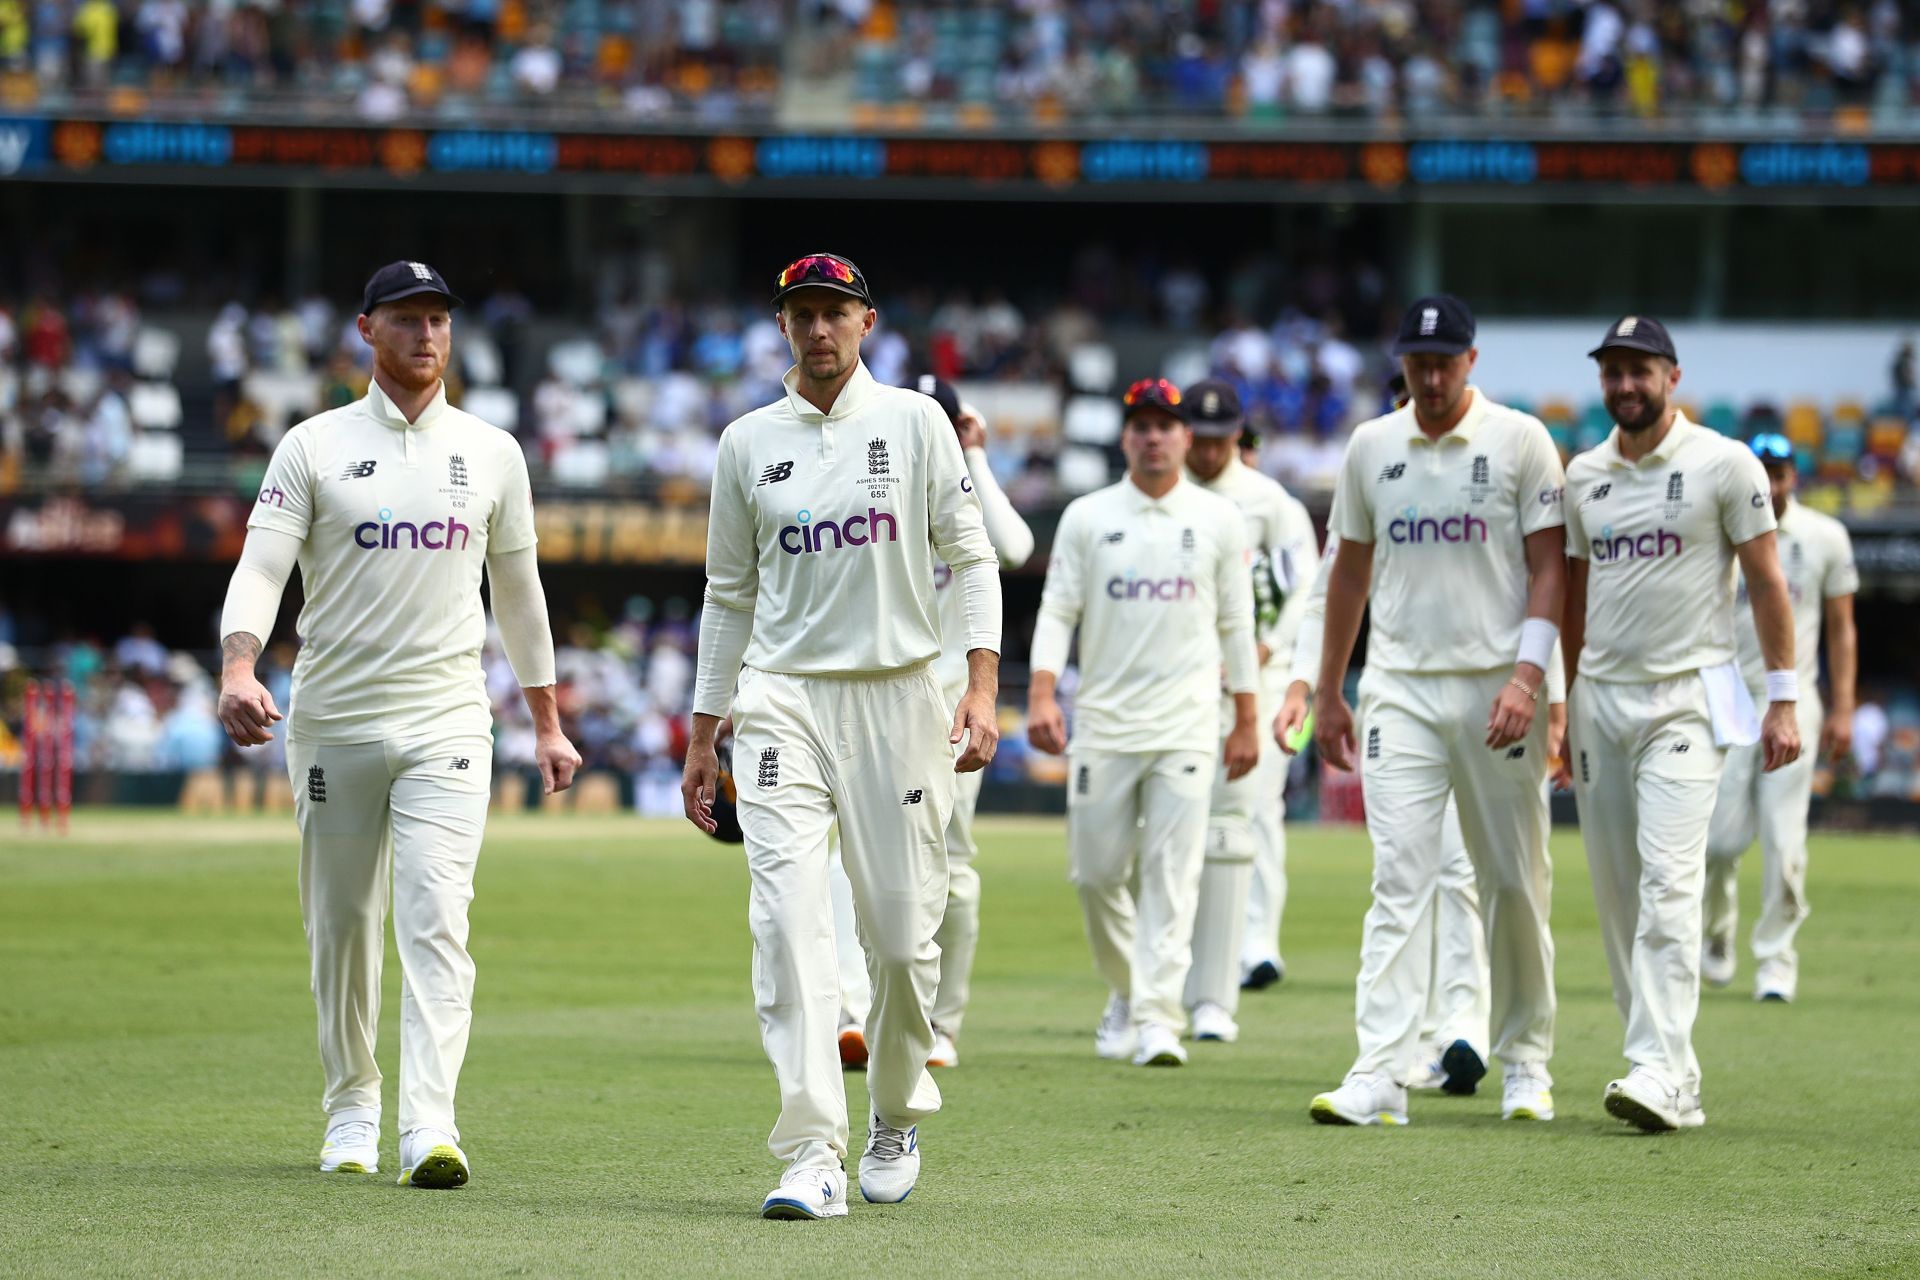 England skipper Joe Root was left frustrated after his side lost the first Test against Australia at the Gabba.